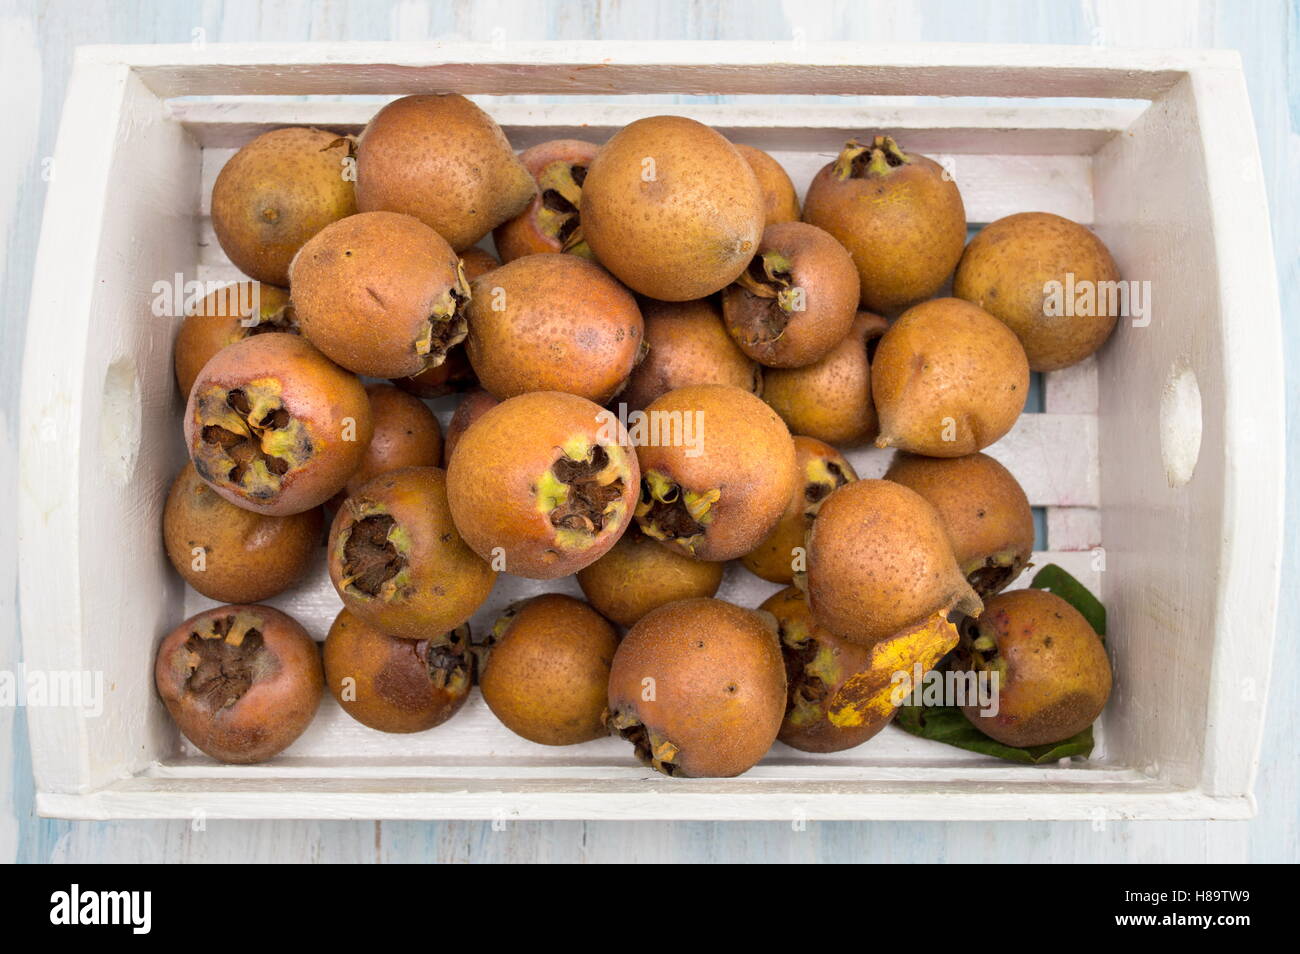 Healthy ripe Medlar fruits in a white wooden box Stock Photo